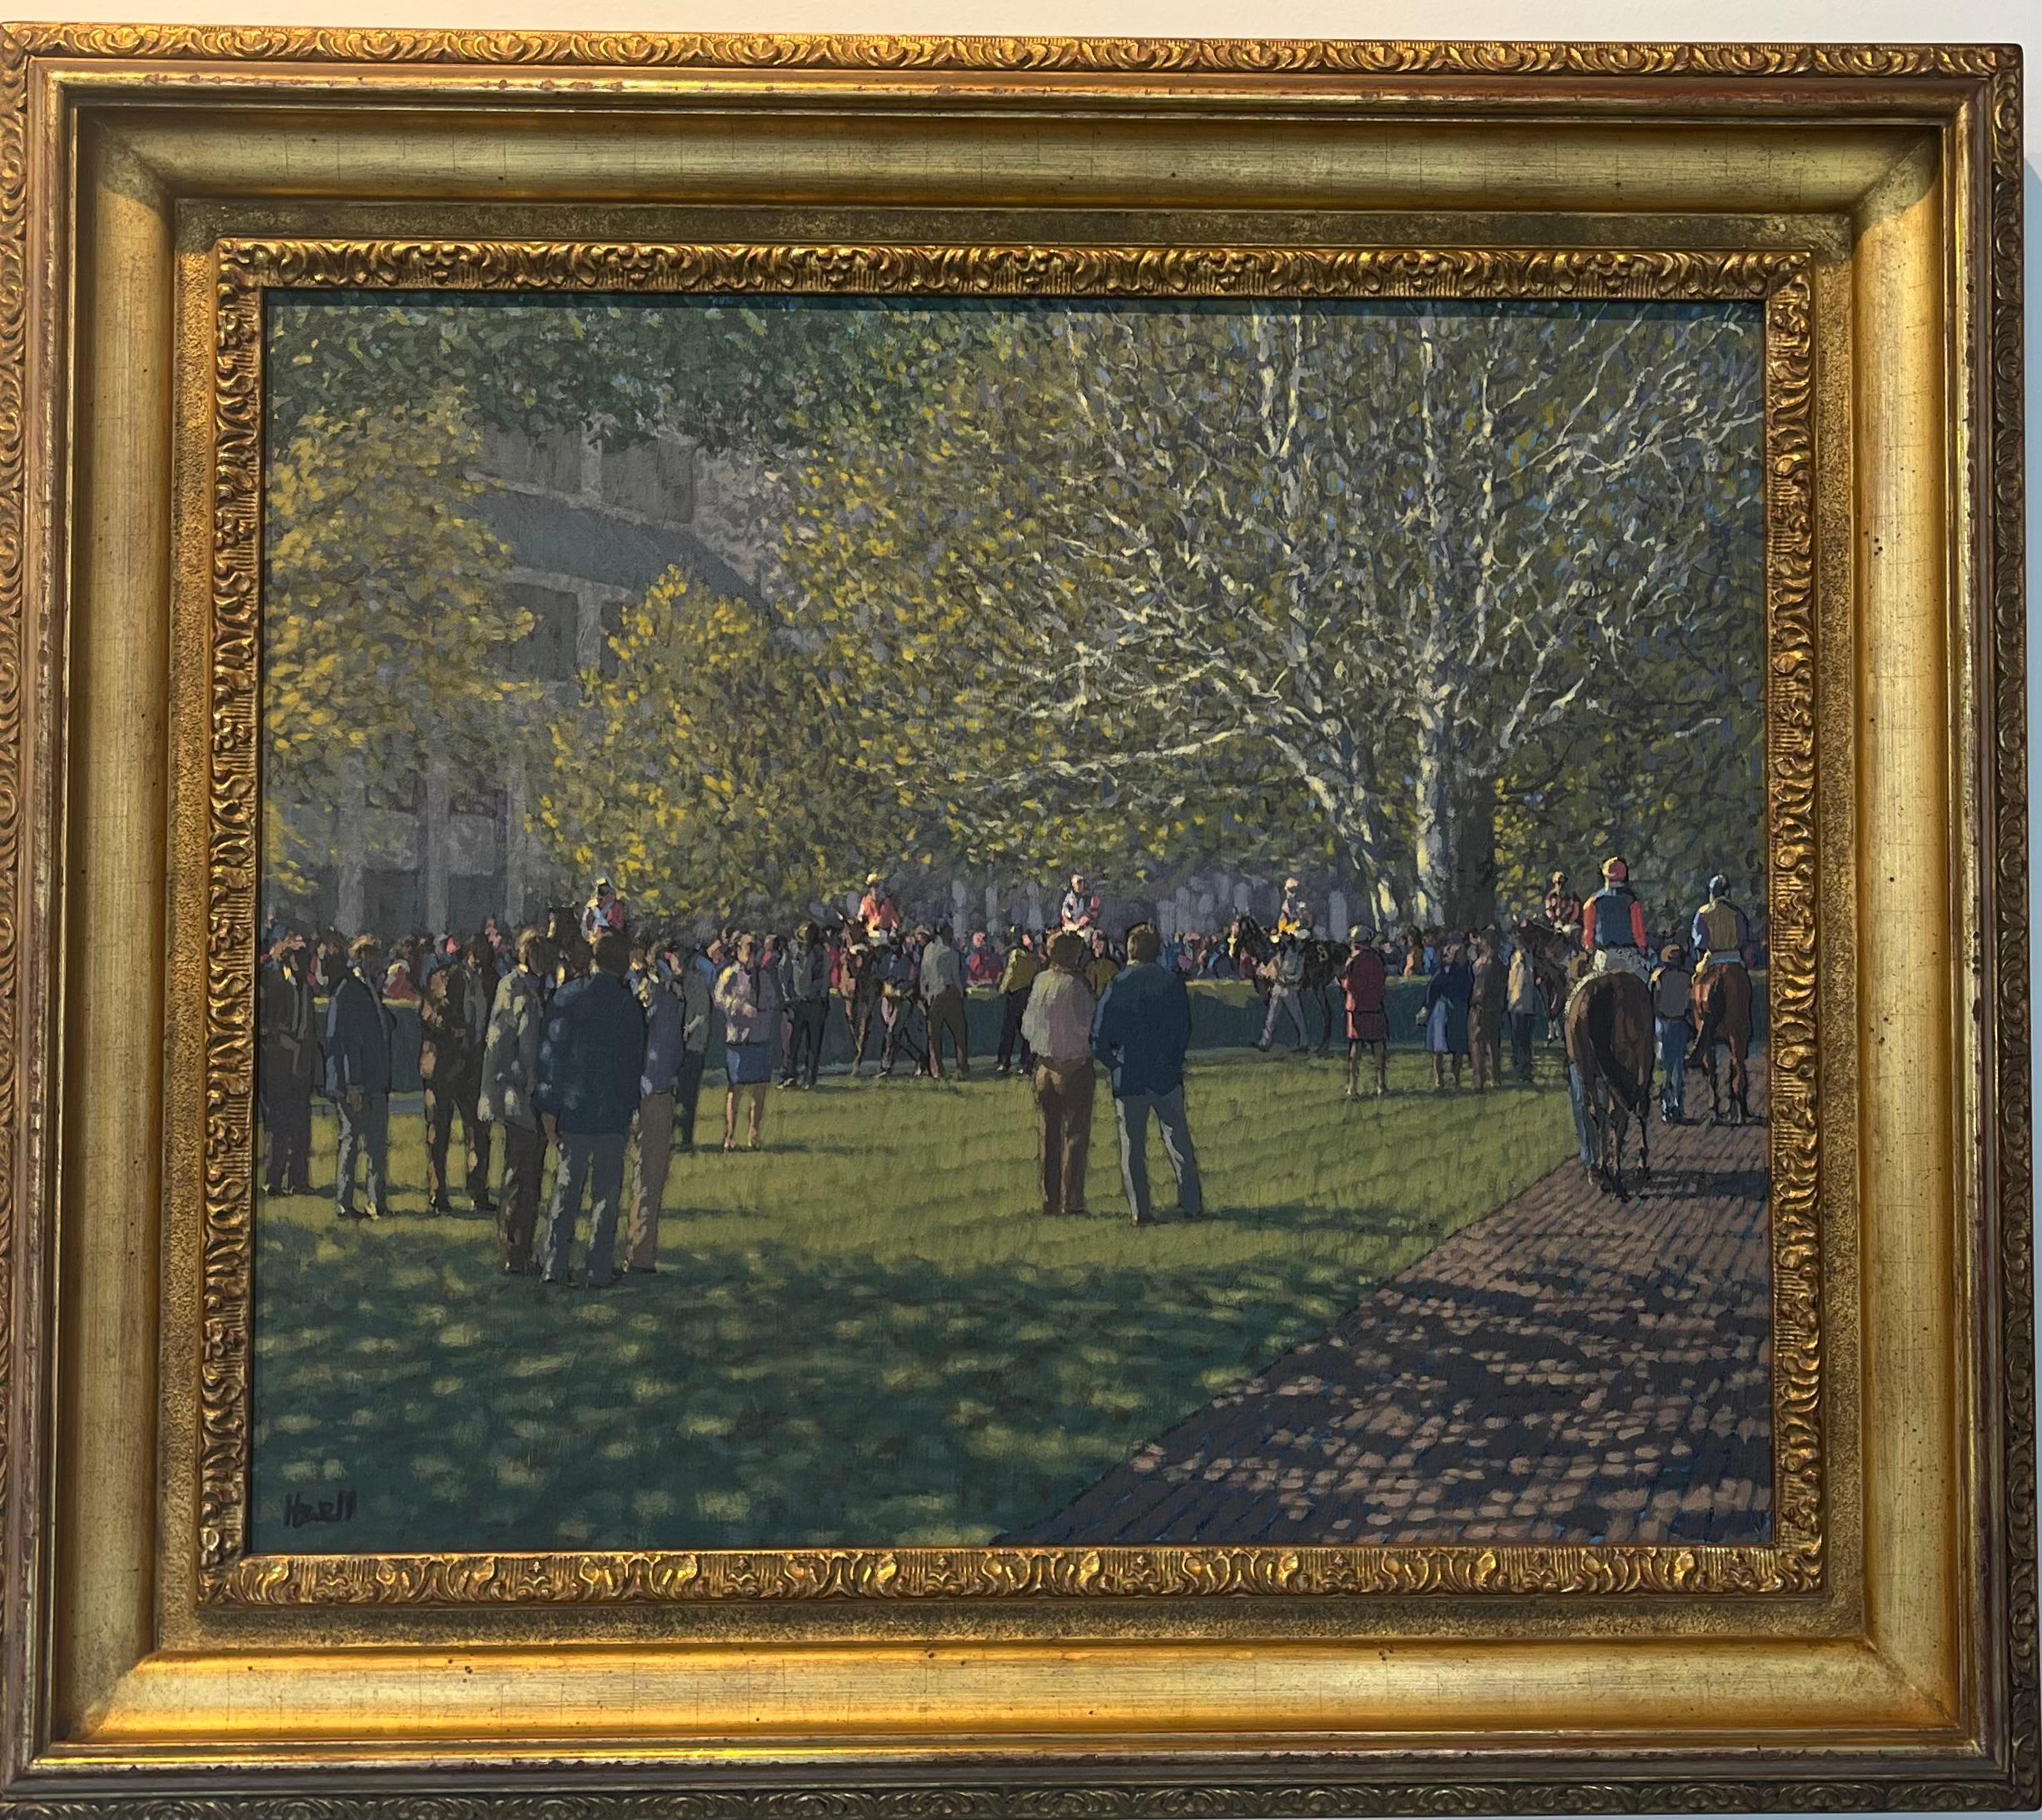 Keeneland Paddock - Painting by Peter howell